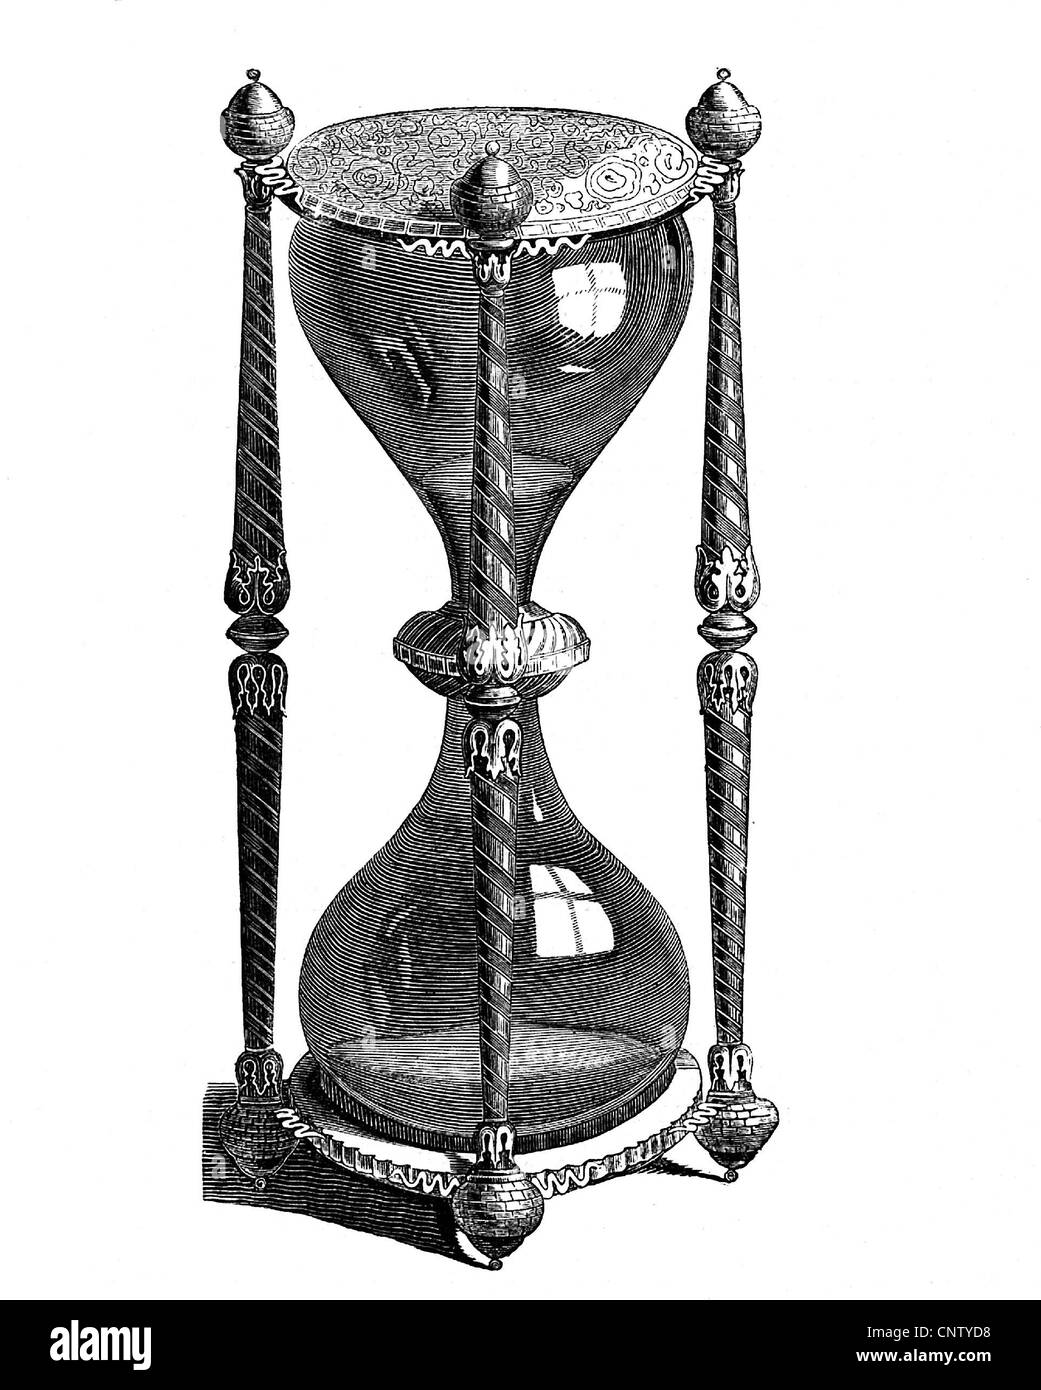 clocks, hour glass, historic, historical, hour glass, hourglass, hour glasses, hourglasses, sand glass, clock, clocks, chronometry, chronometries, clipping, cut out, cut-out, cut-outs, Additional-Rights-Clearences-Not Available Stock Photo